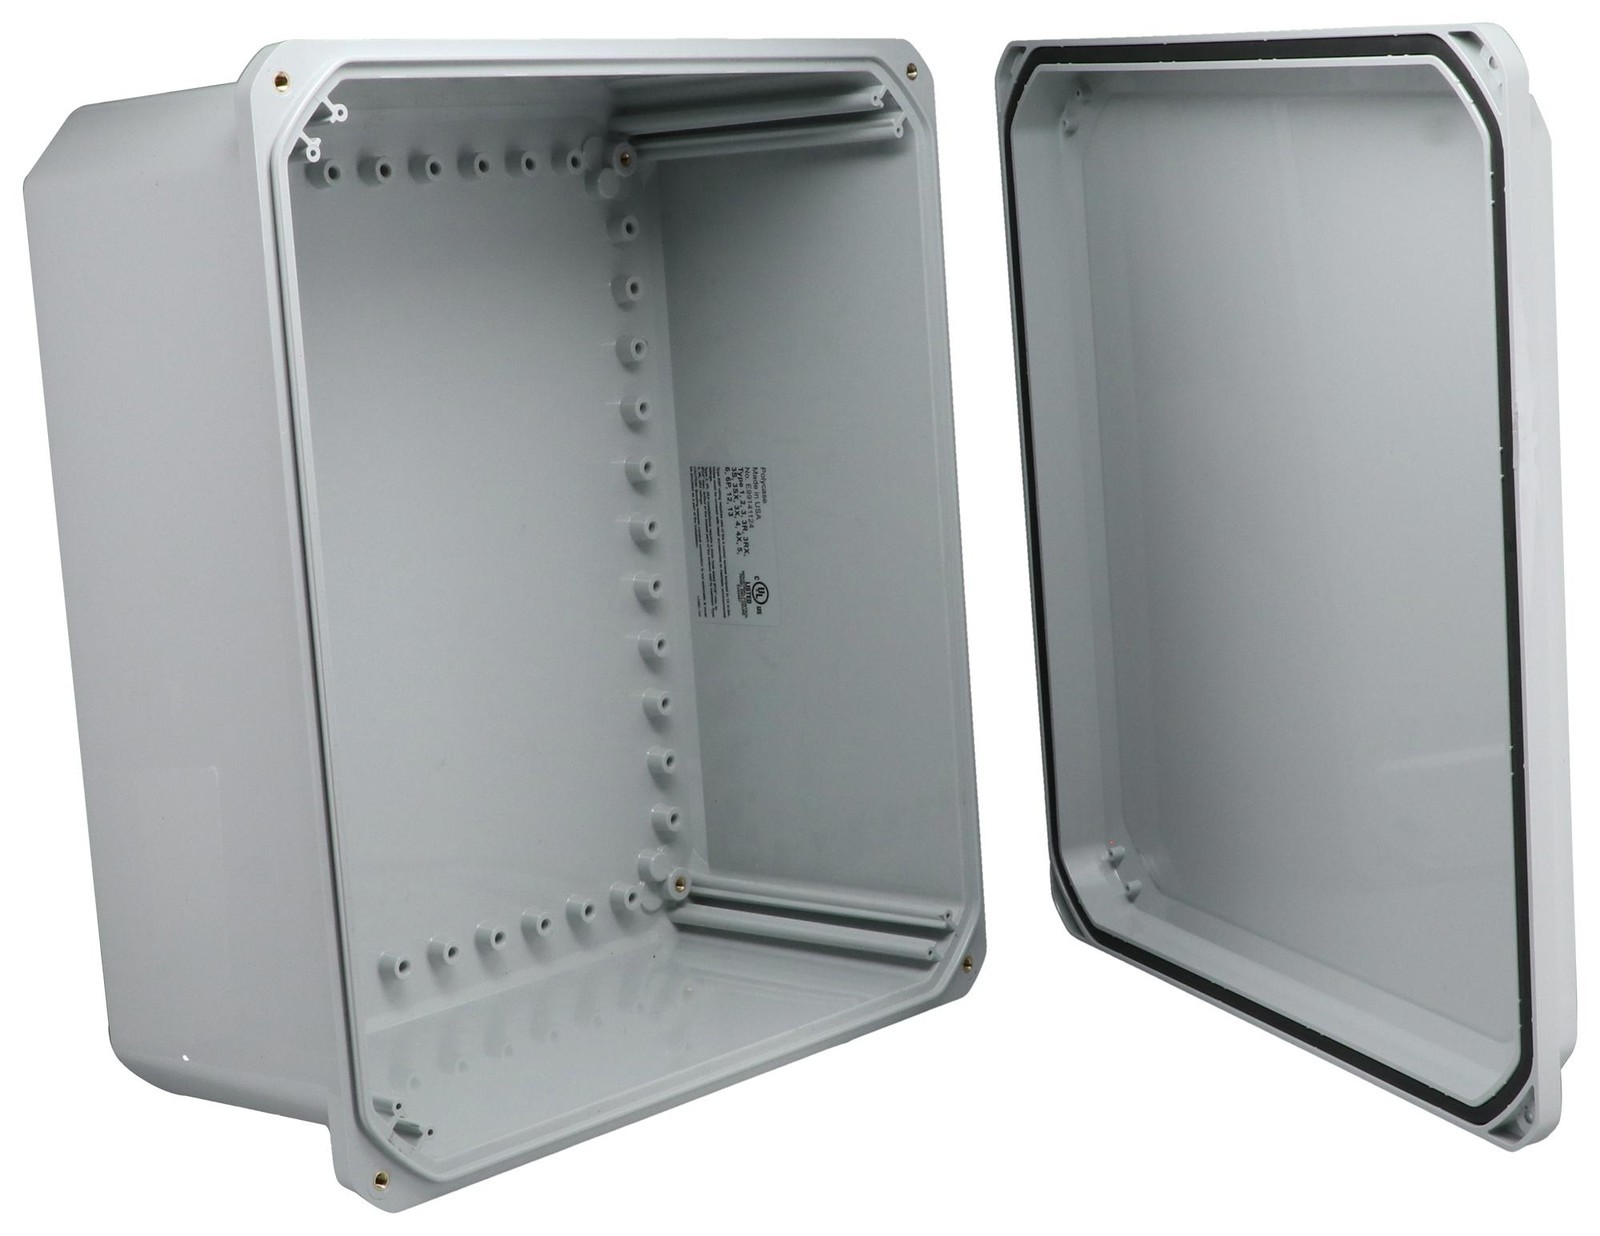 Bud Industries Dps-28713 Enclosure, Outdoor, Pc, Light Grey